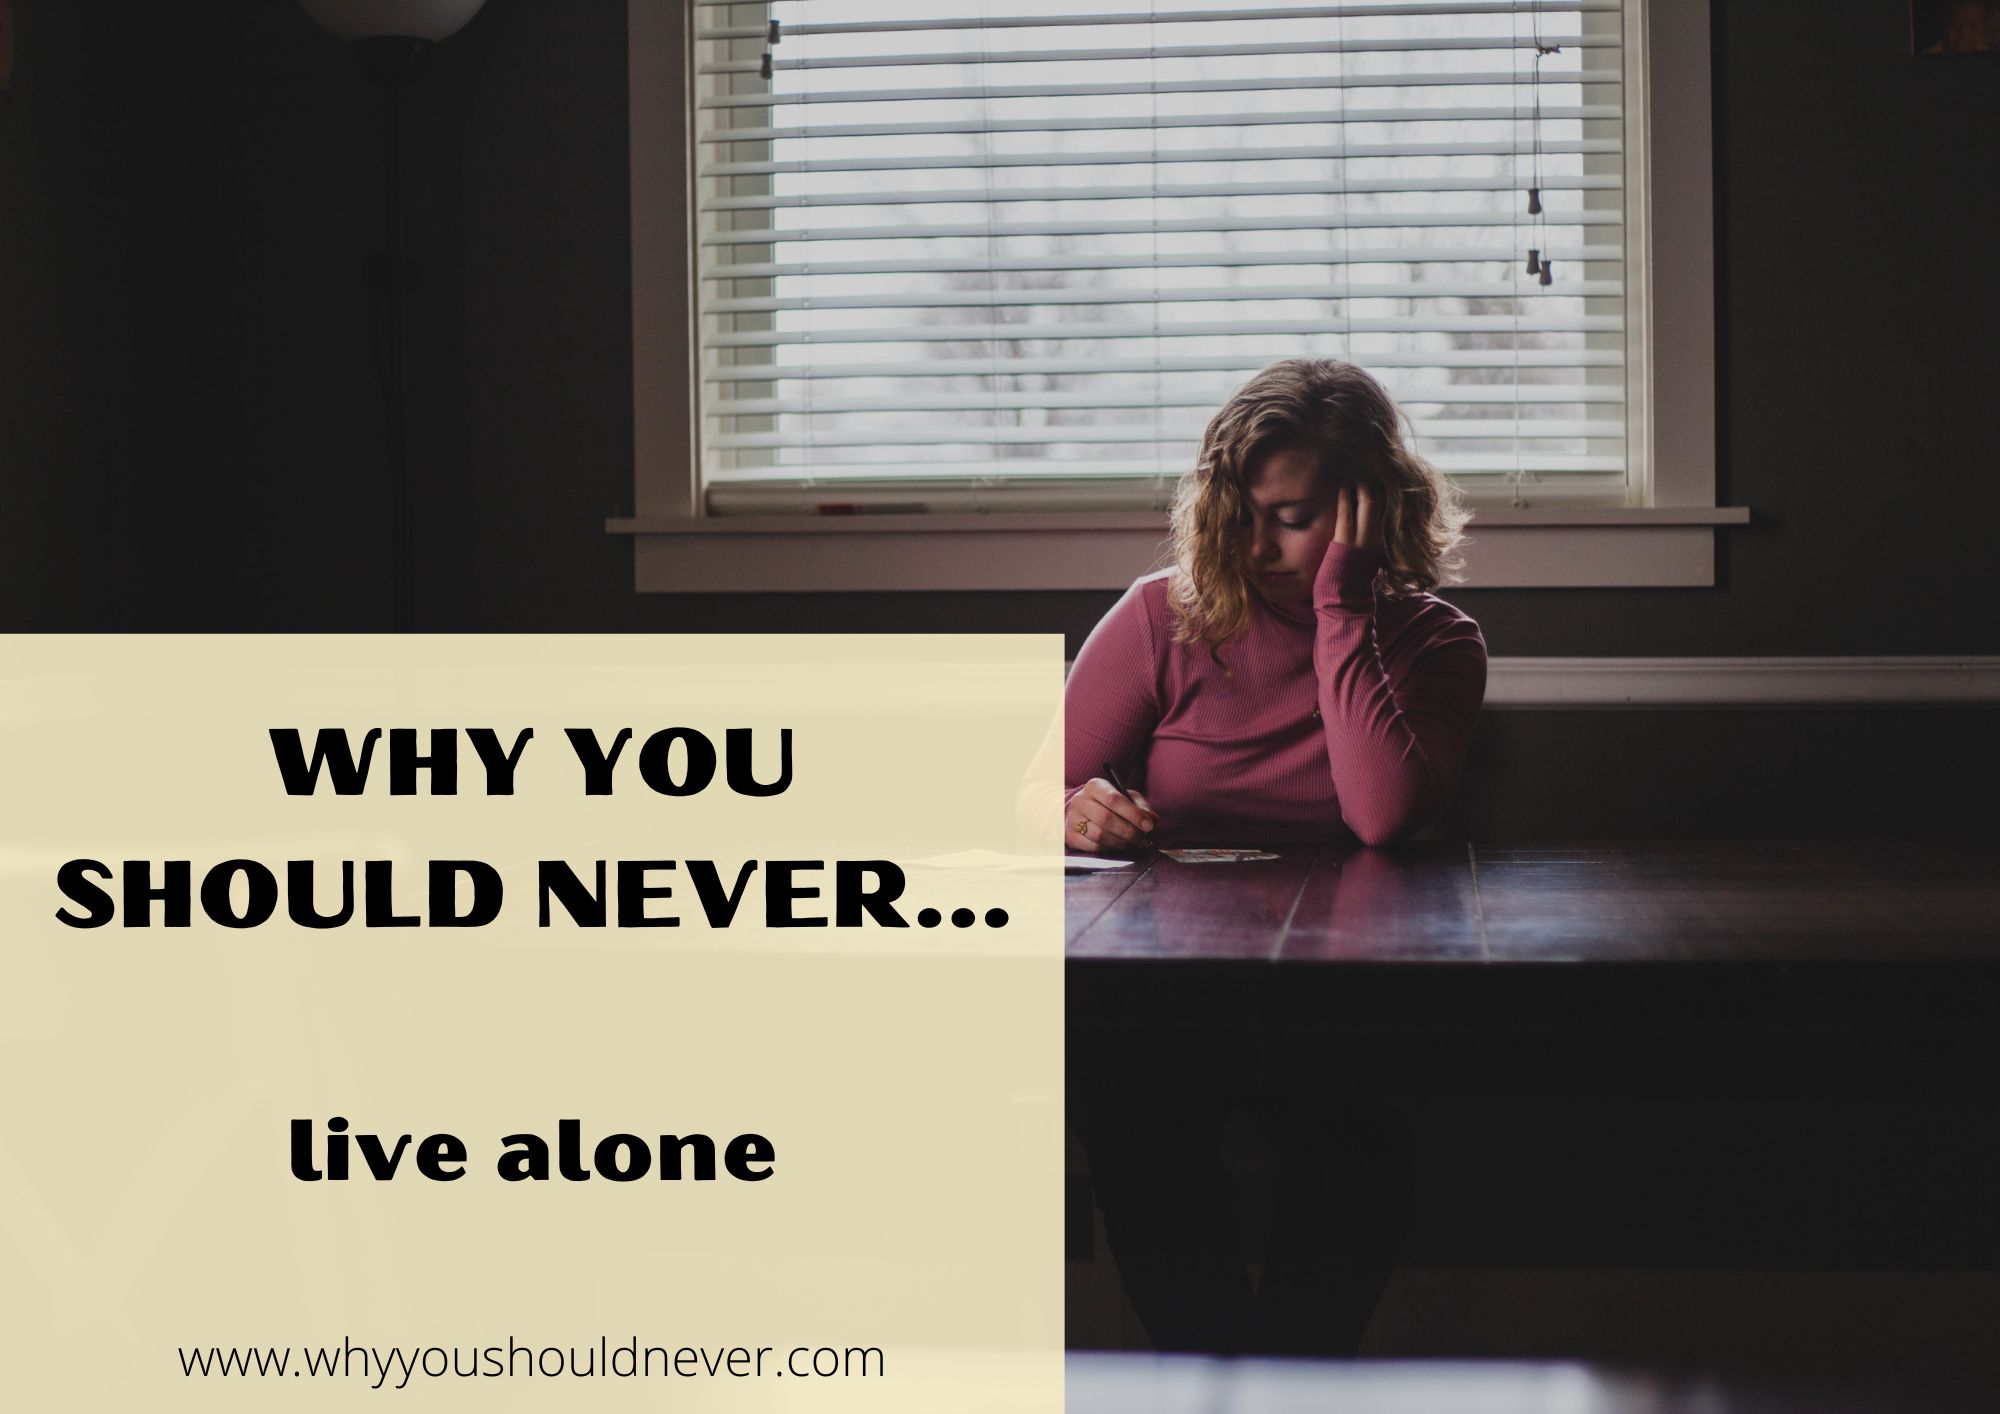 Why You Should Never Live Alone